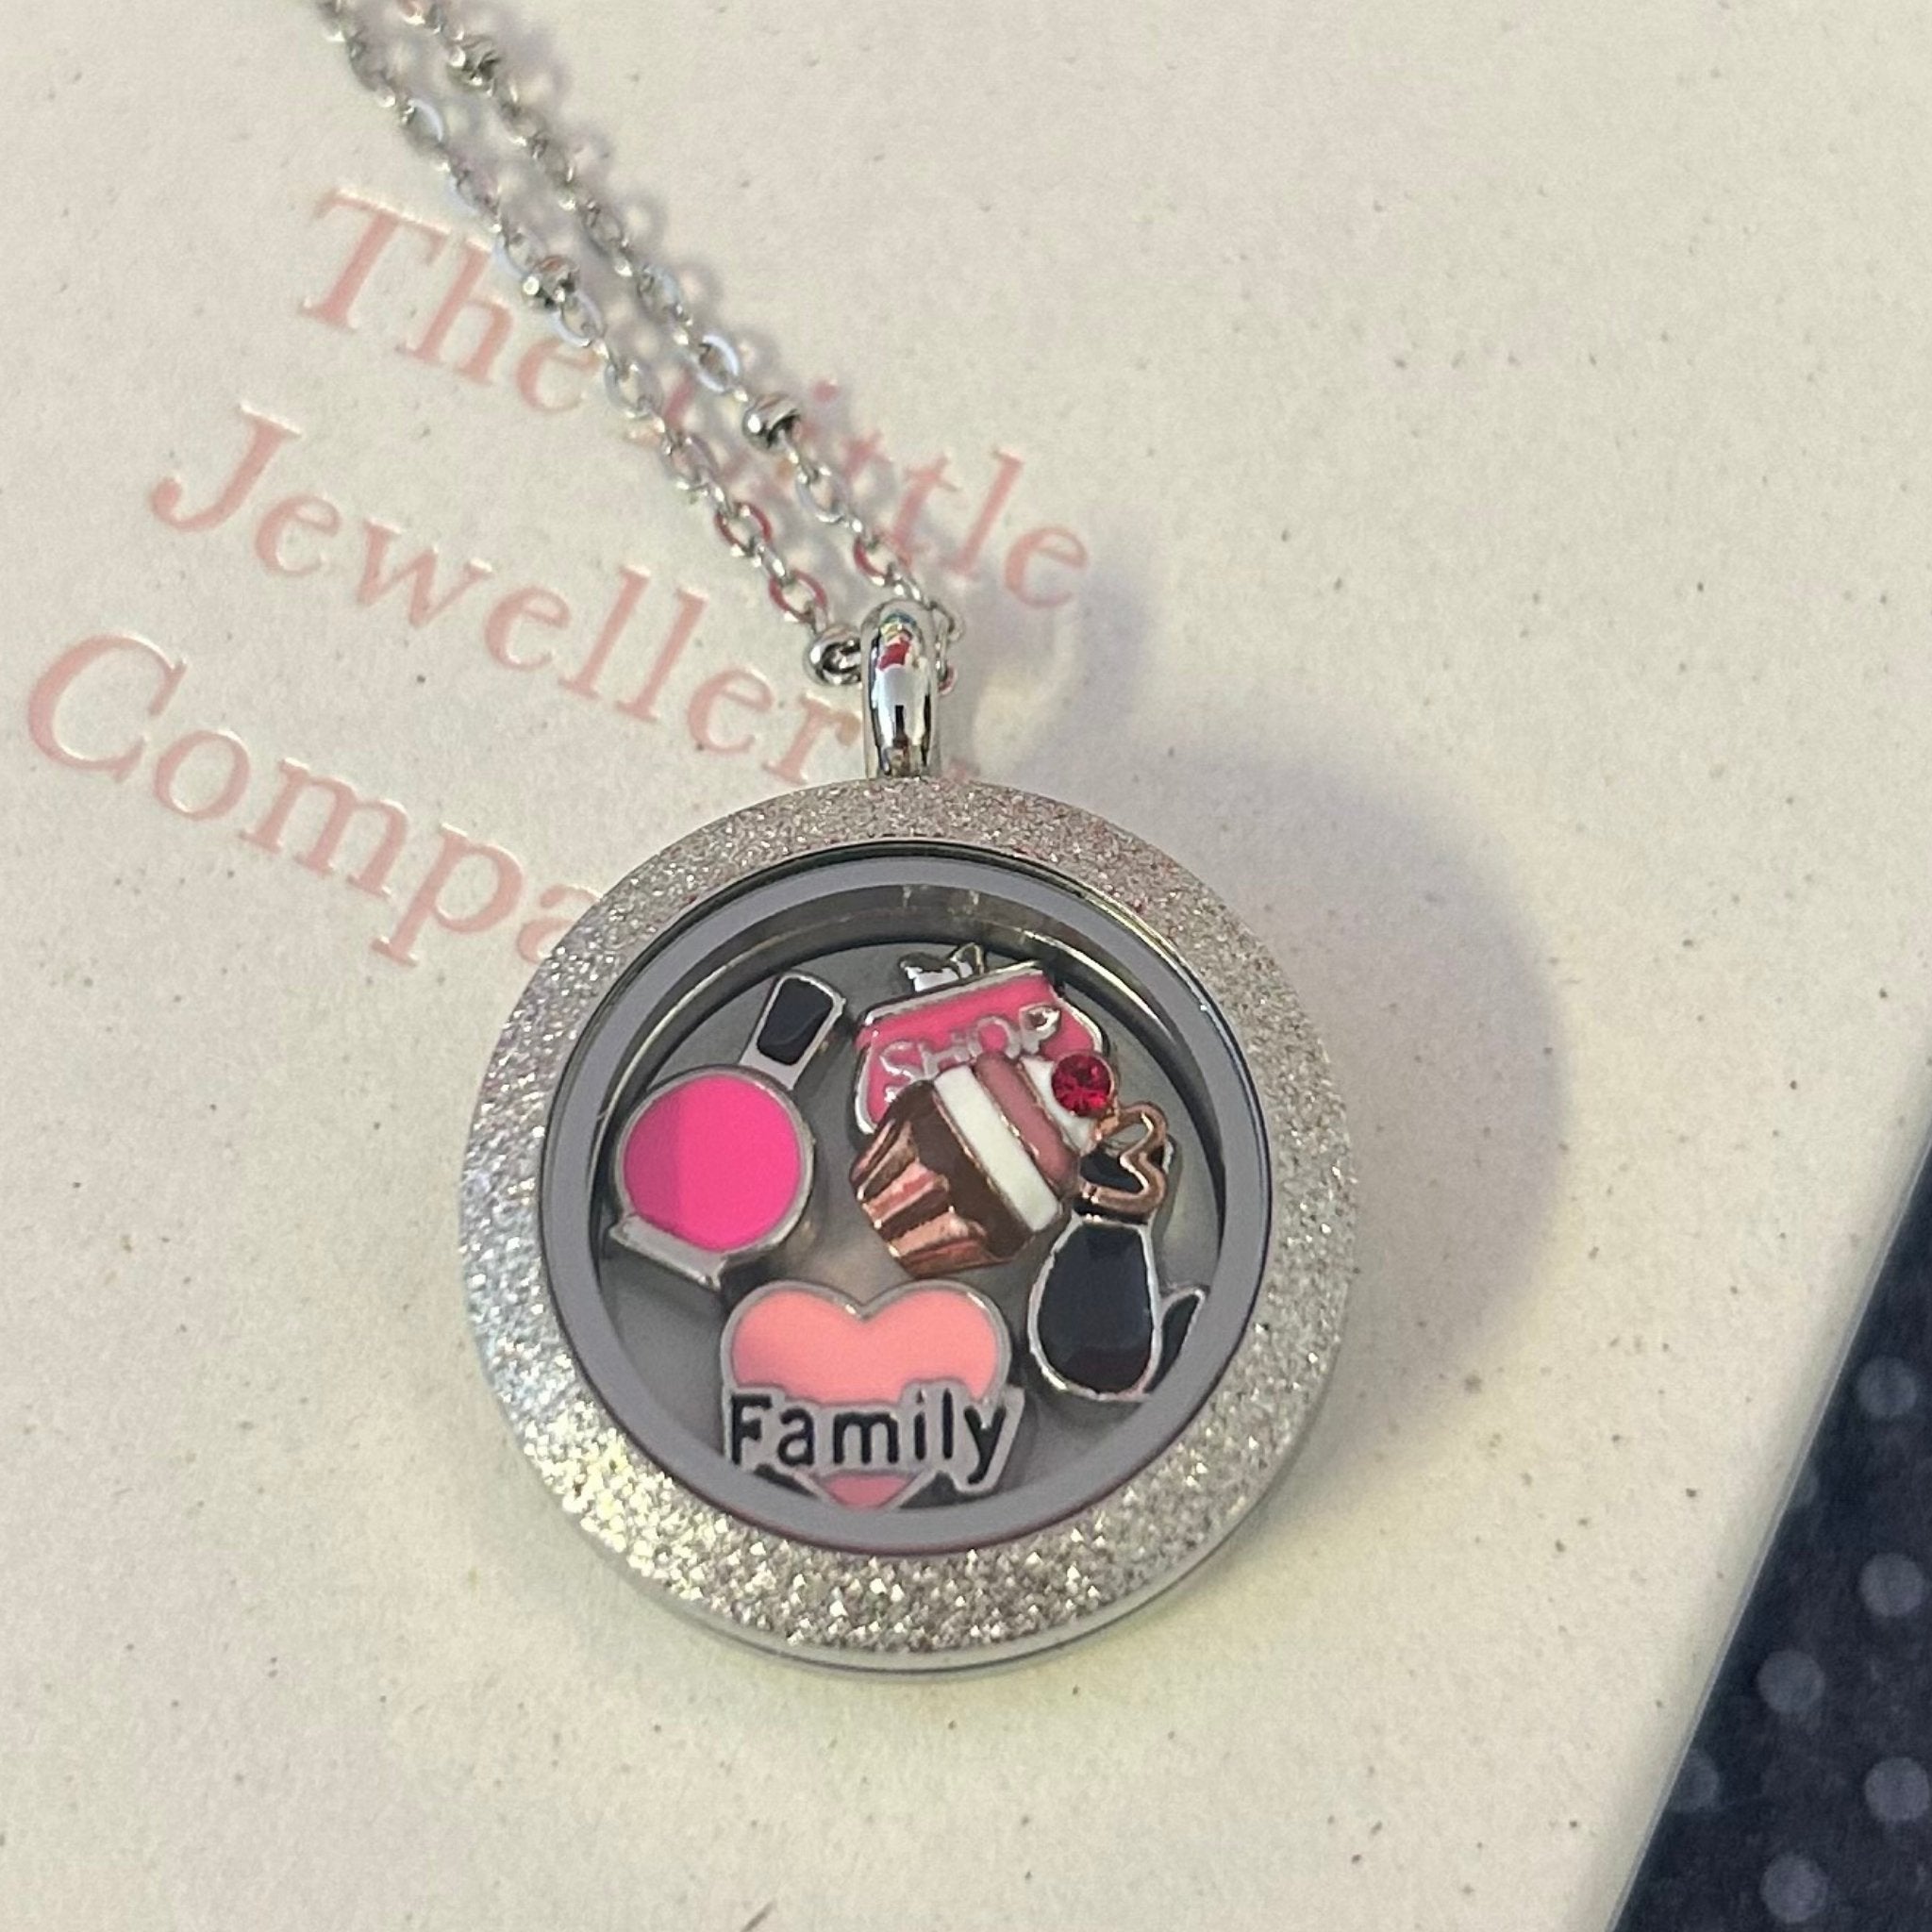 Buy Veeshy A Mothers Love Has No End Floating Locket Necklace Pendant with  Charms & 24PCS Birthstones, Mother's Day Birthday Xmas Gifts at Amazon.in